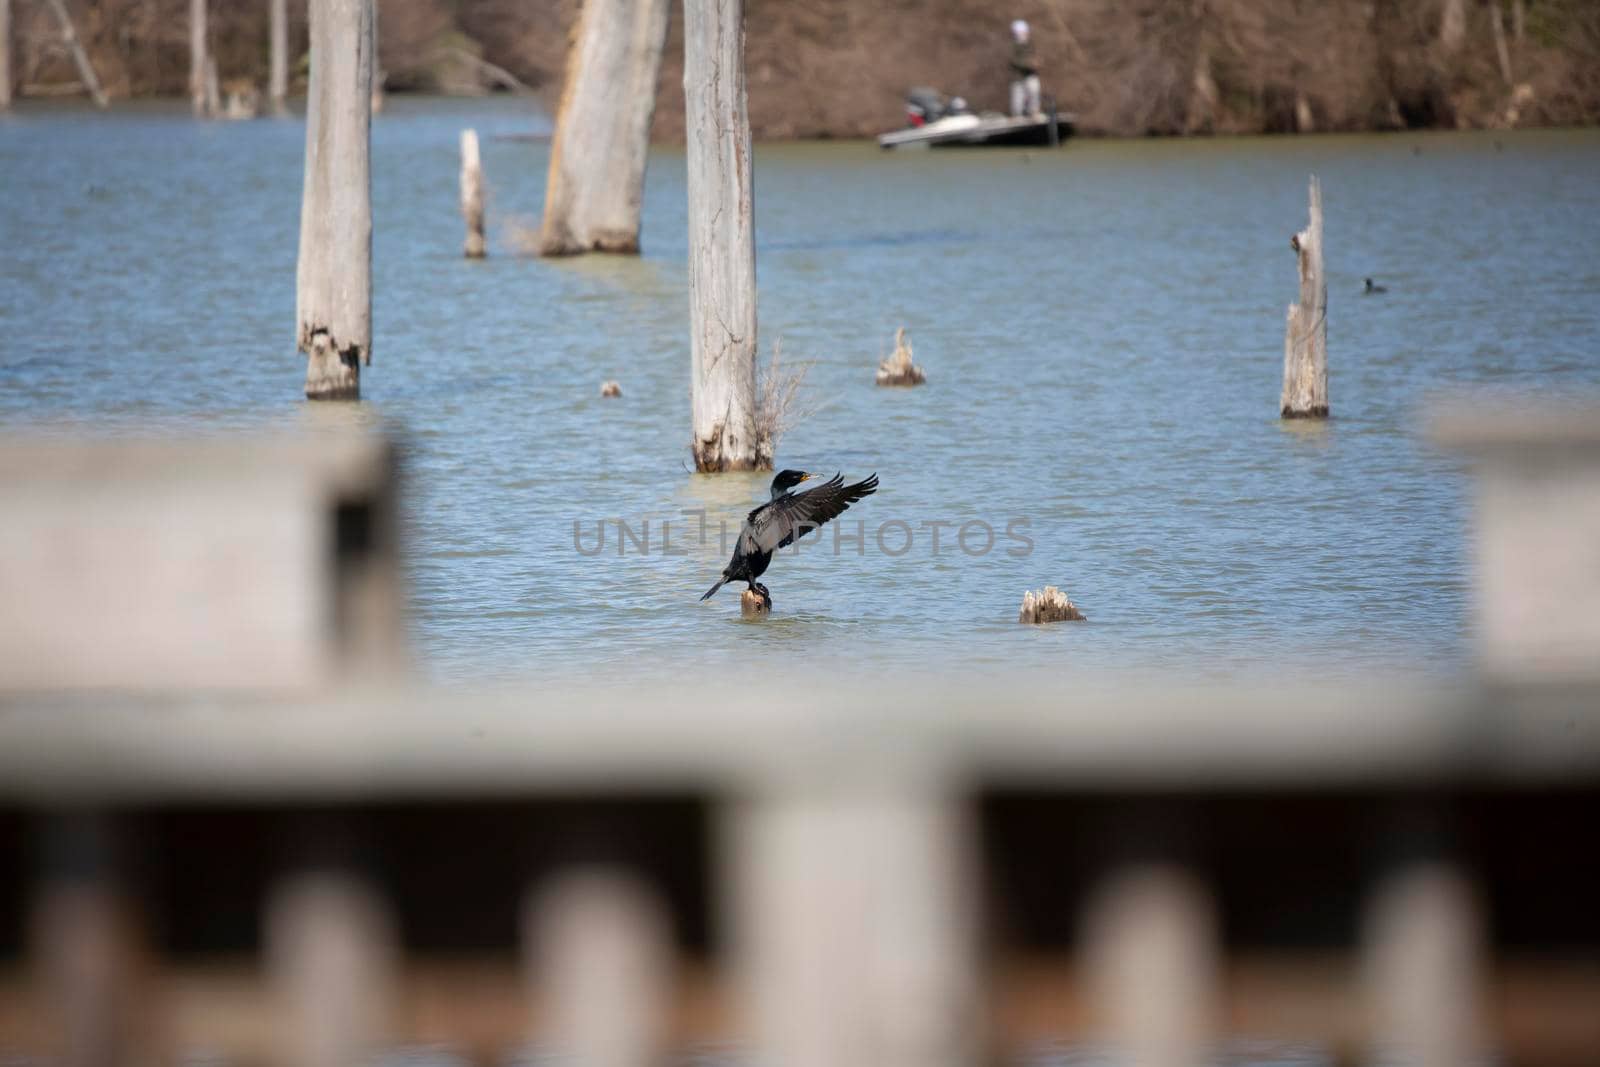 Adult double-crested cormorant (Phalacrocorax auritus) perched on a dead tree stump, pumping its wings out to dry